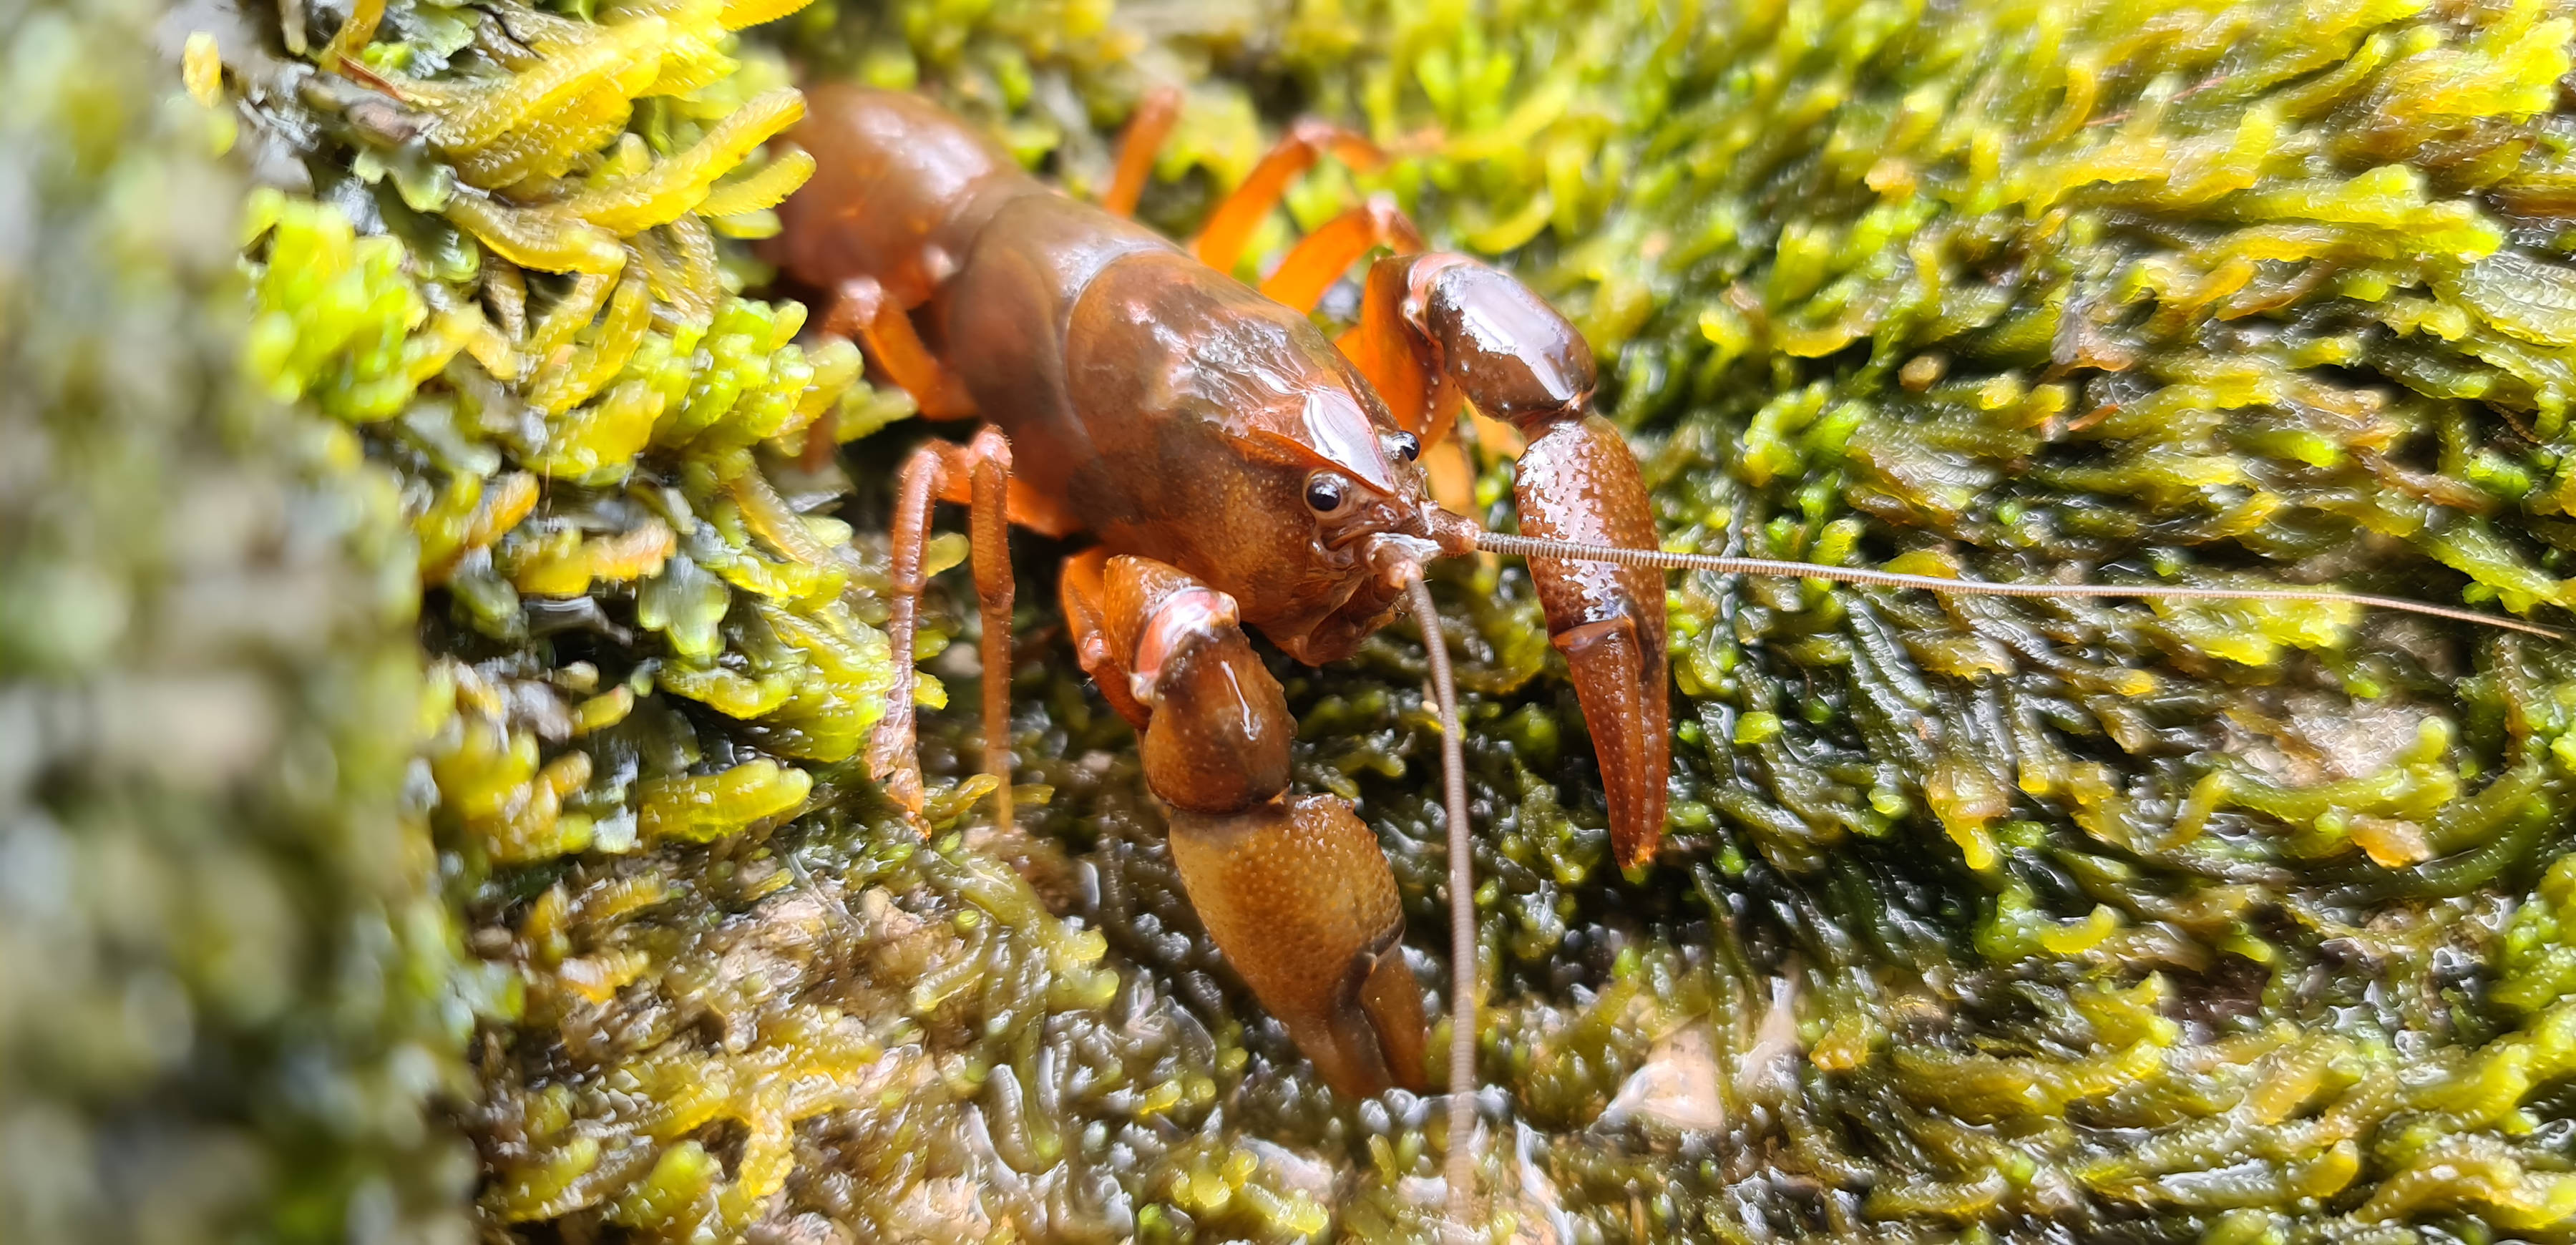 The Tasmanian Short-Tailed Rain Crayfish. This one is a small red/brown crayfish with large front pincers on green river weed.